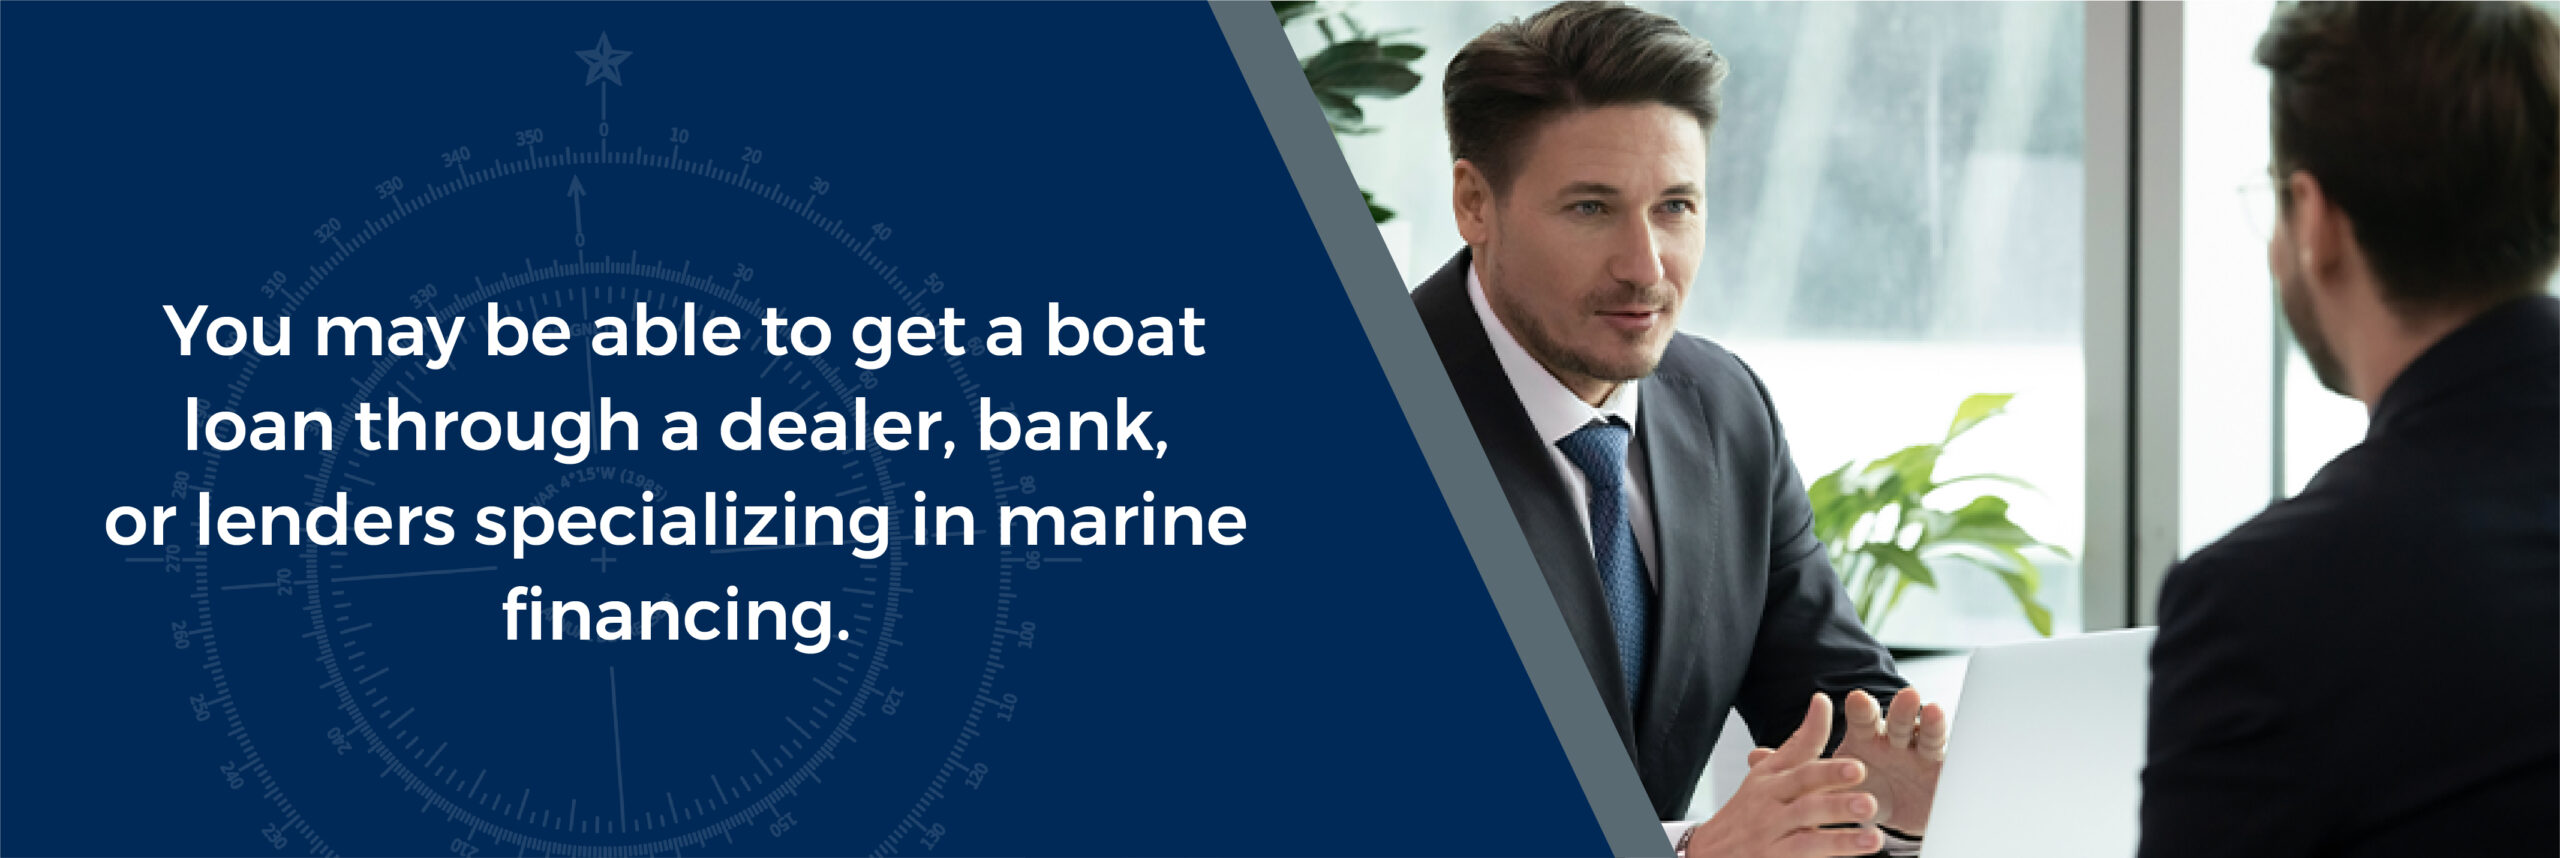 You may be able to get a boat loan through a dealer, bank, or lenders specializing in marine financing - image of a man meeting with a lender